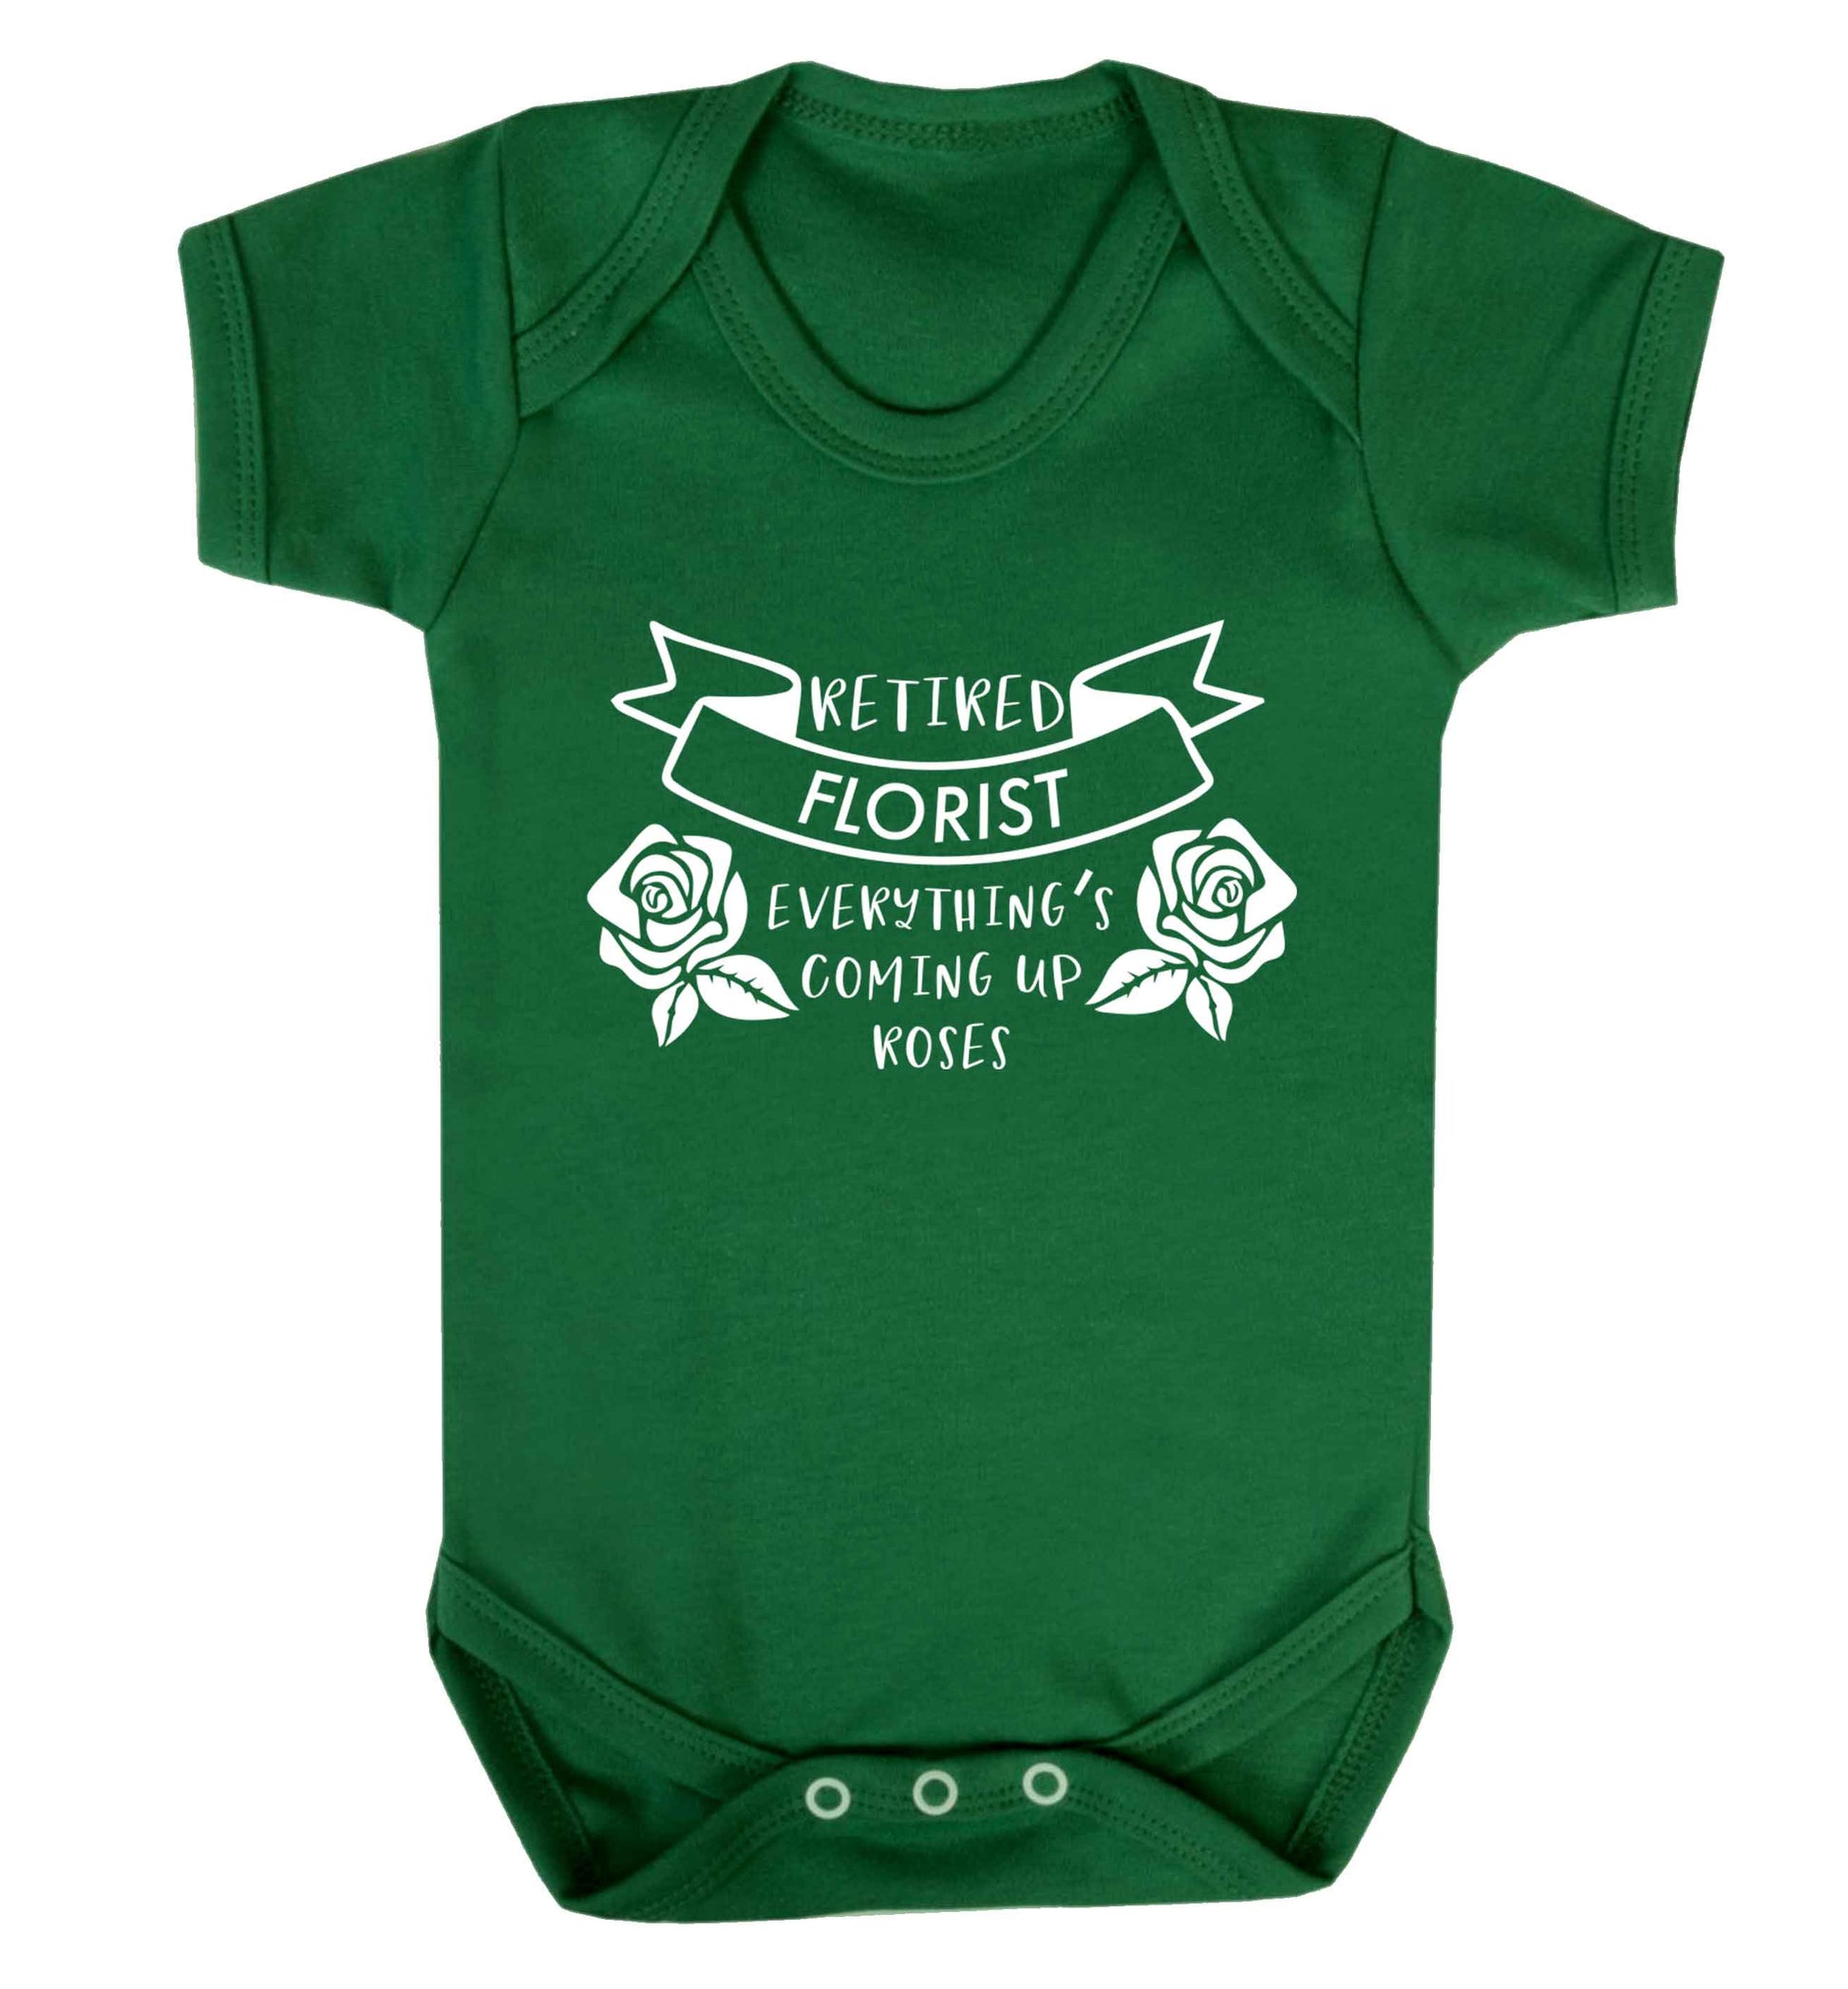 Retired florist everything's coming up roses Baby Vest green 18-24 months